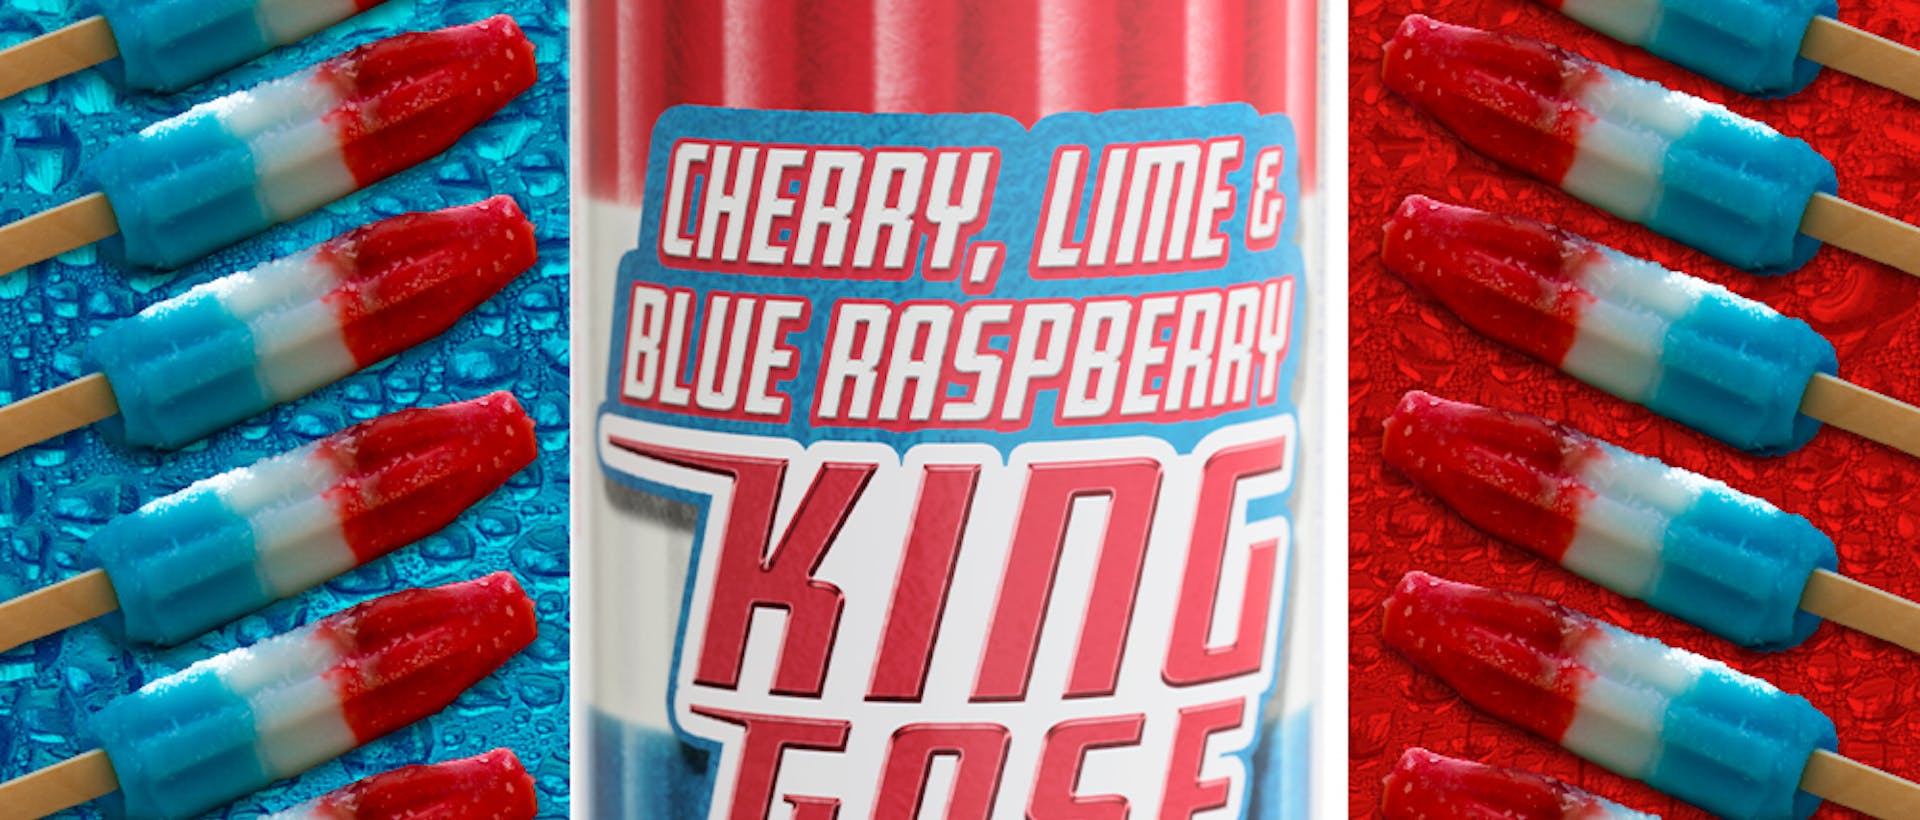 ARTWORK - Cherry Lime and Blue Raspberry Gose with Bomb Pop Popsicles (updated 06-24-2022)